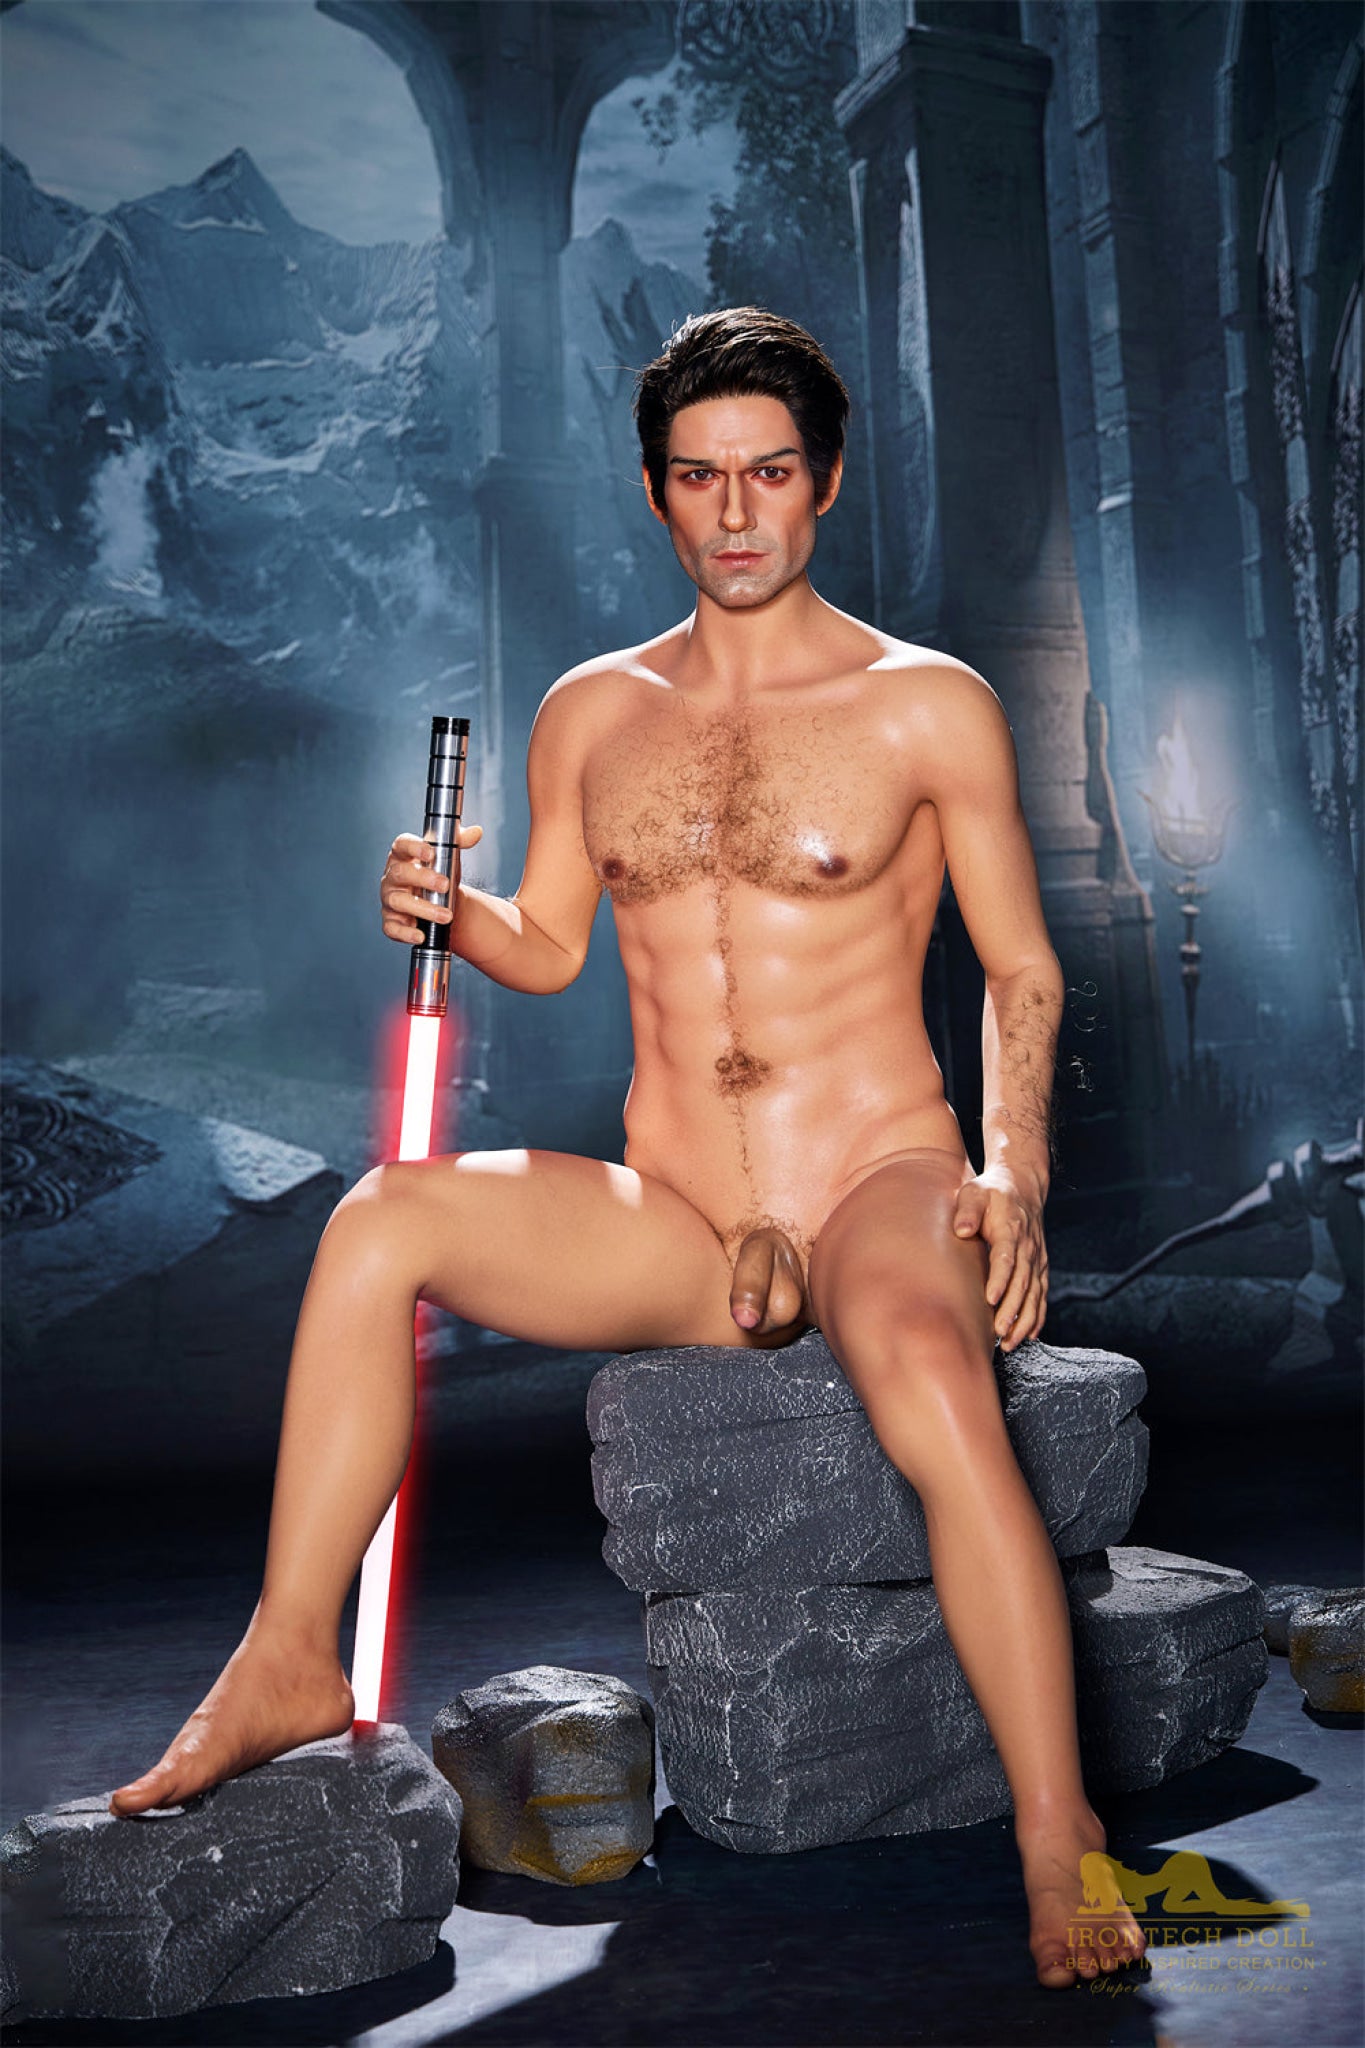 Thomas Jedi Silicone Male Sex Doll - IronTech Doll® Irontech Doll®